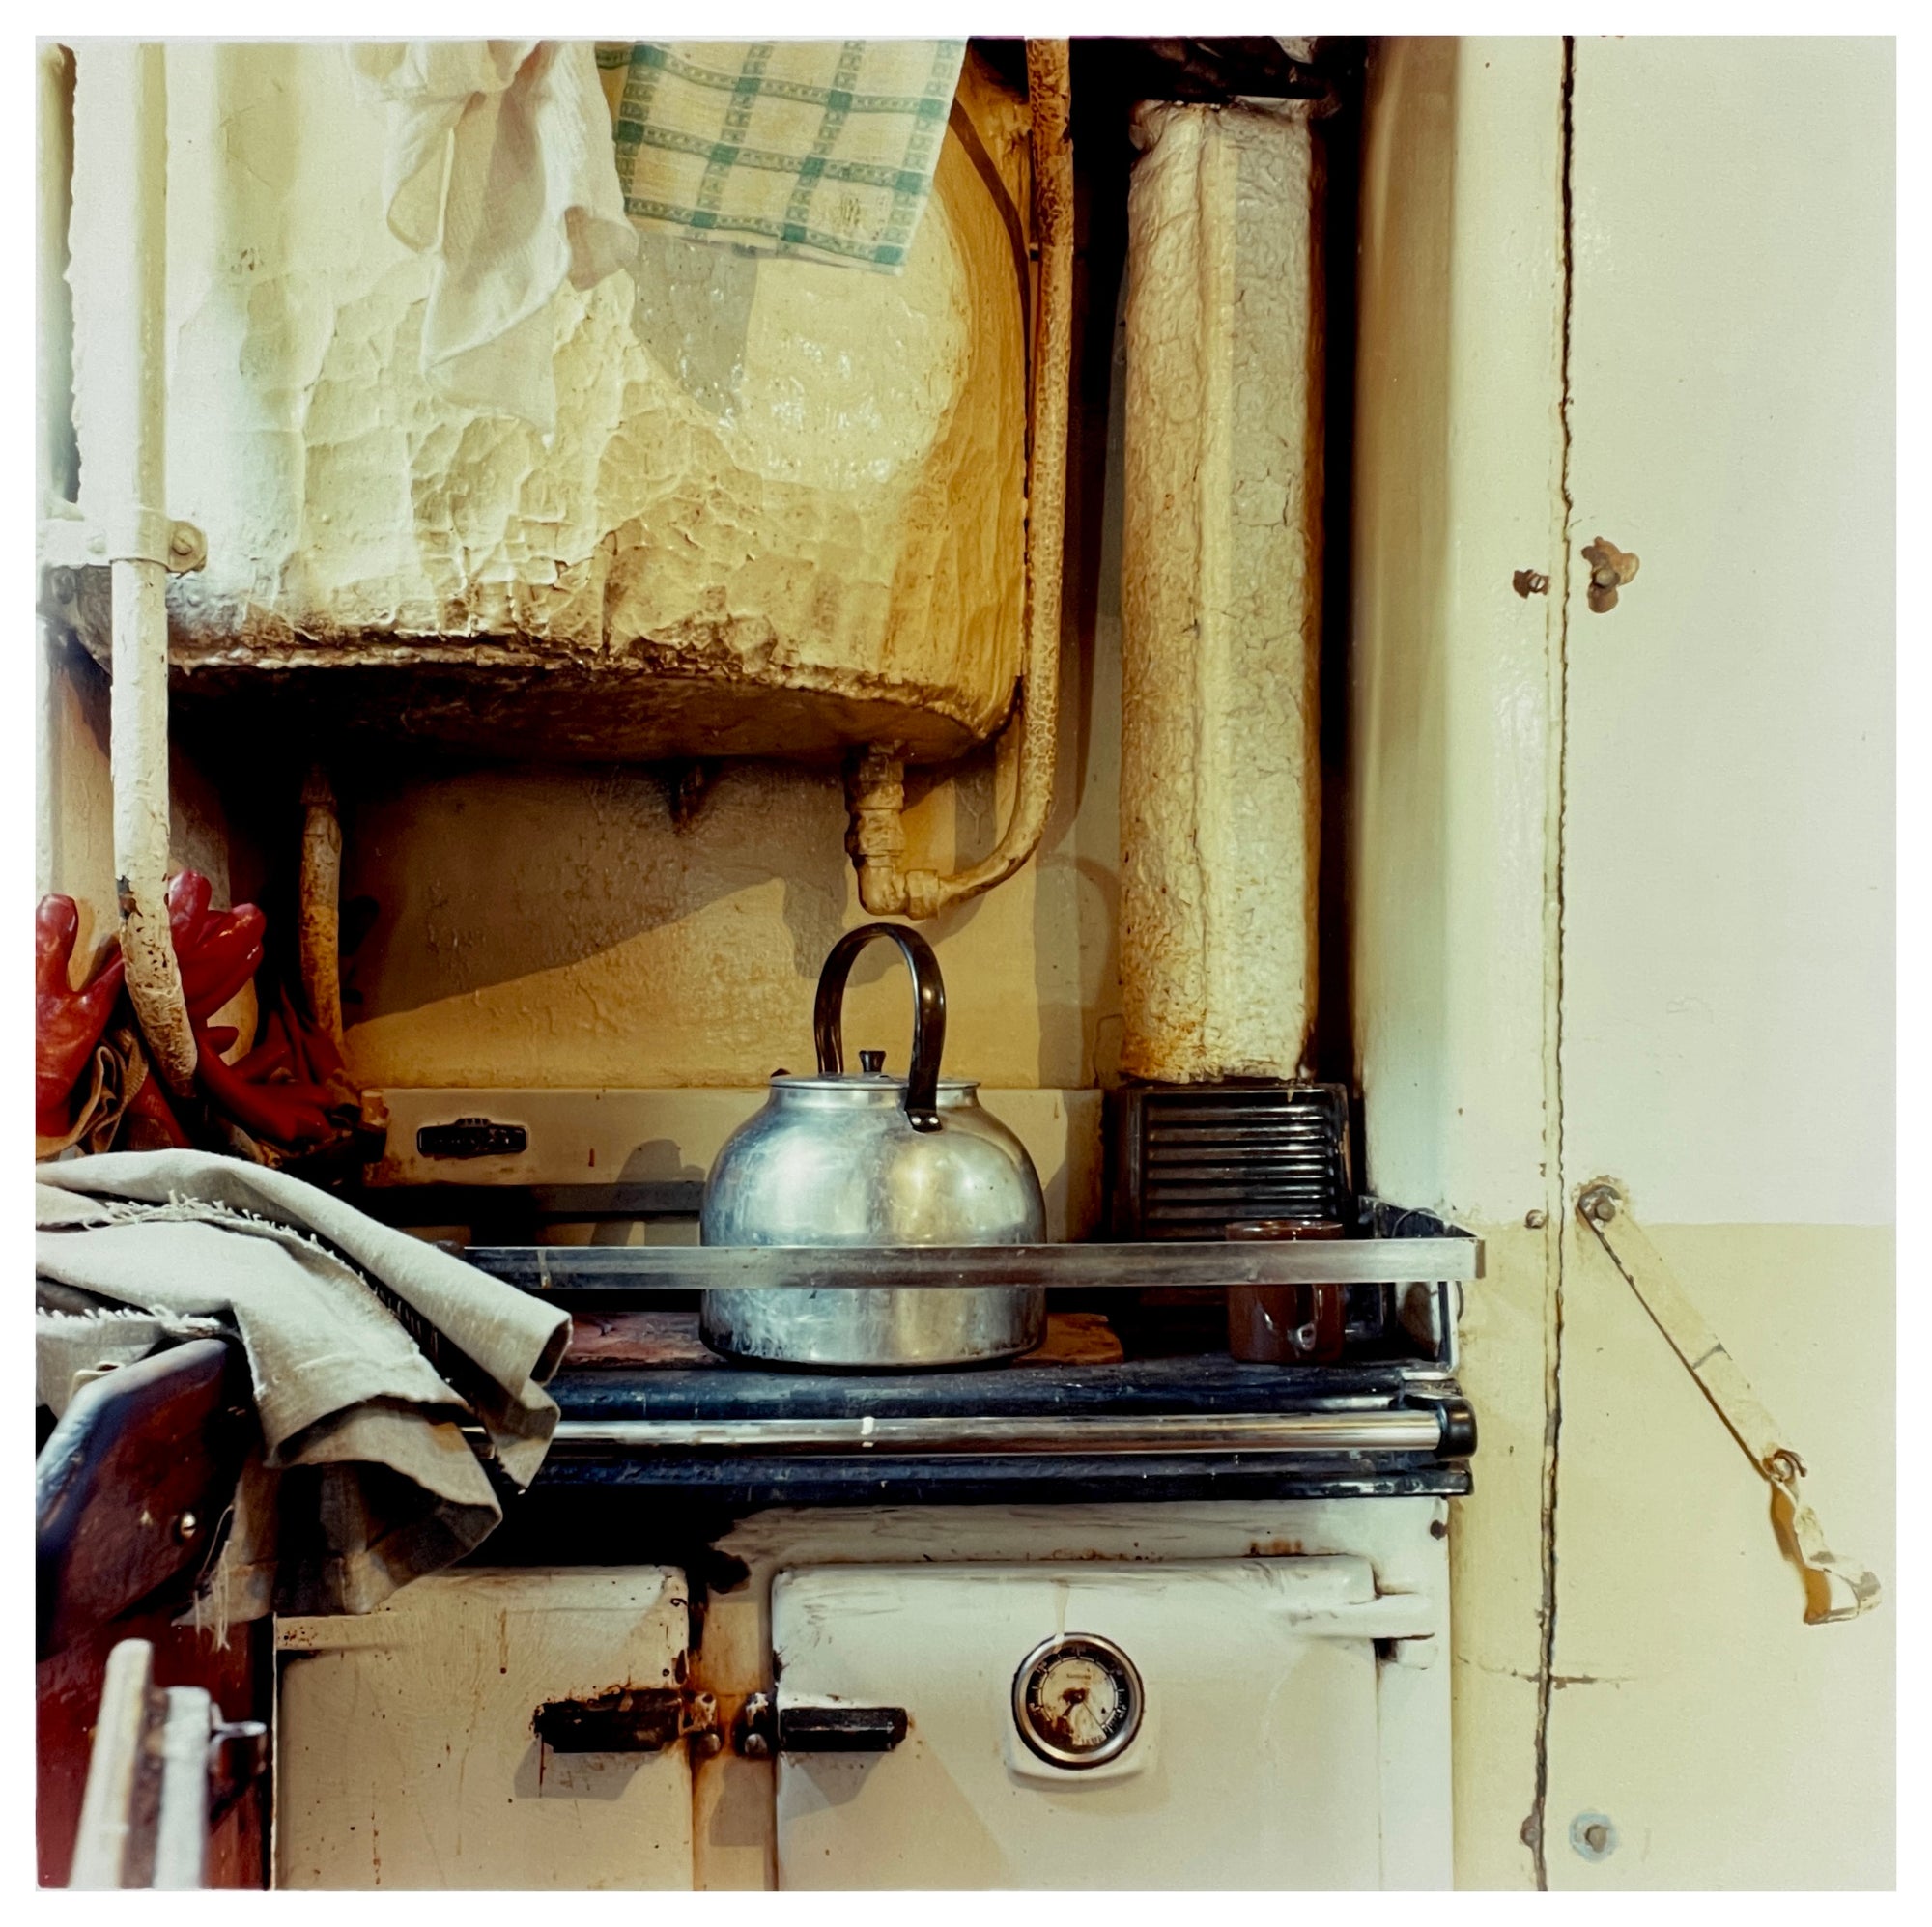 Photograph by Richard Heeps.  A well worn aga provides a home for a big steel kettle.  Above, is an old boiler.